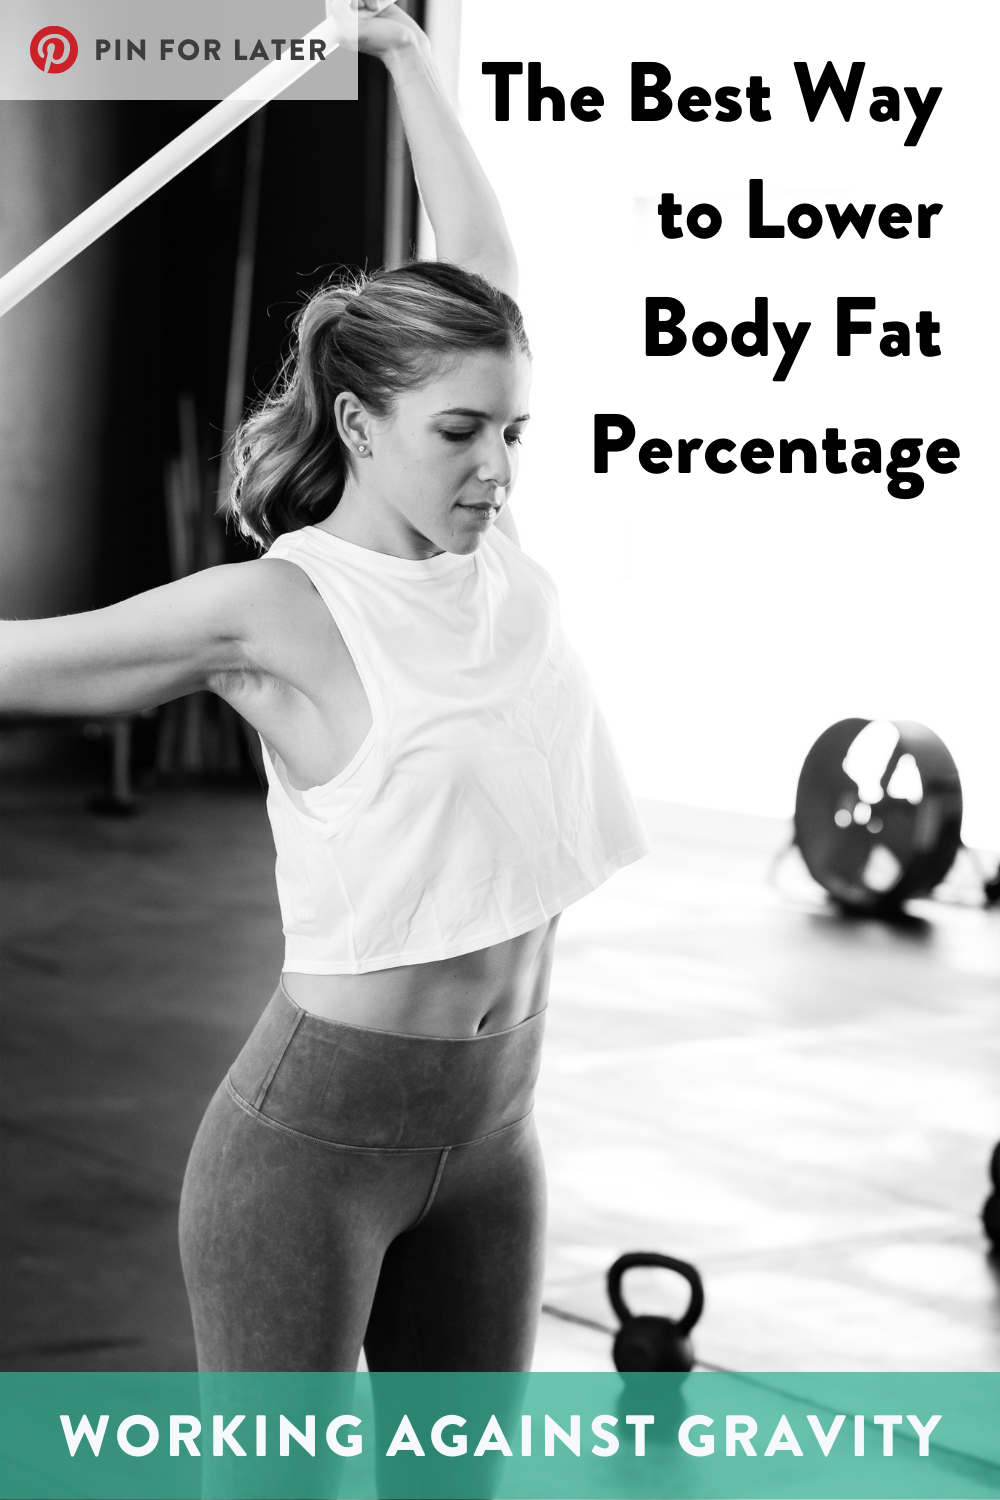 BMI or Body Fat Percentage - Which Should I Focus On? 